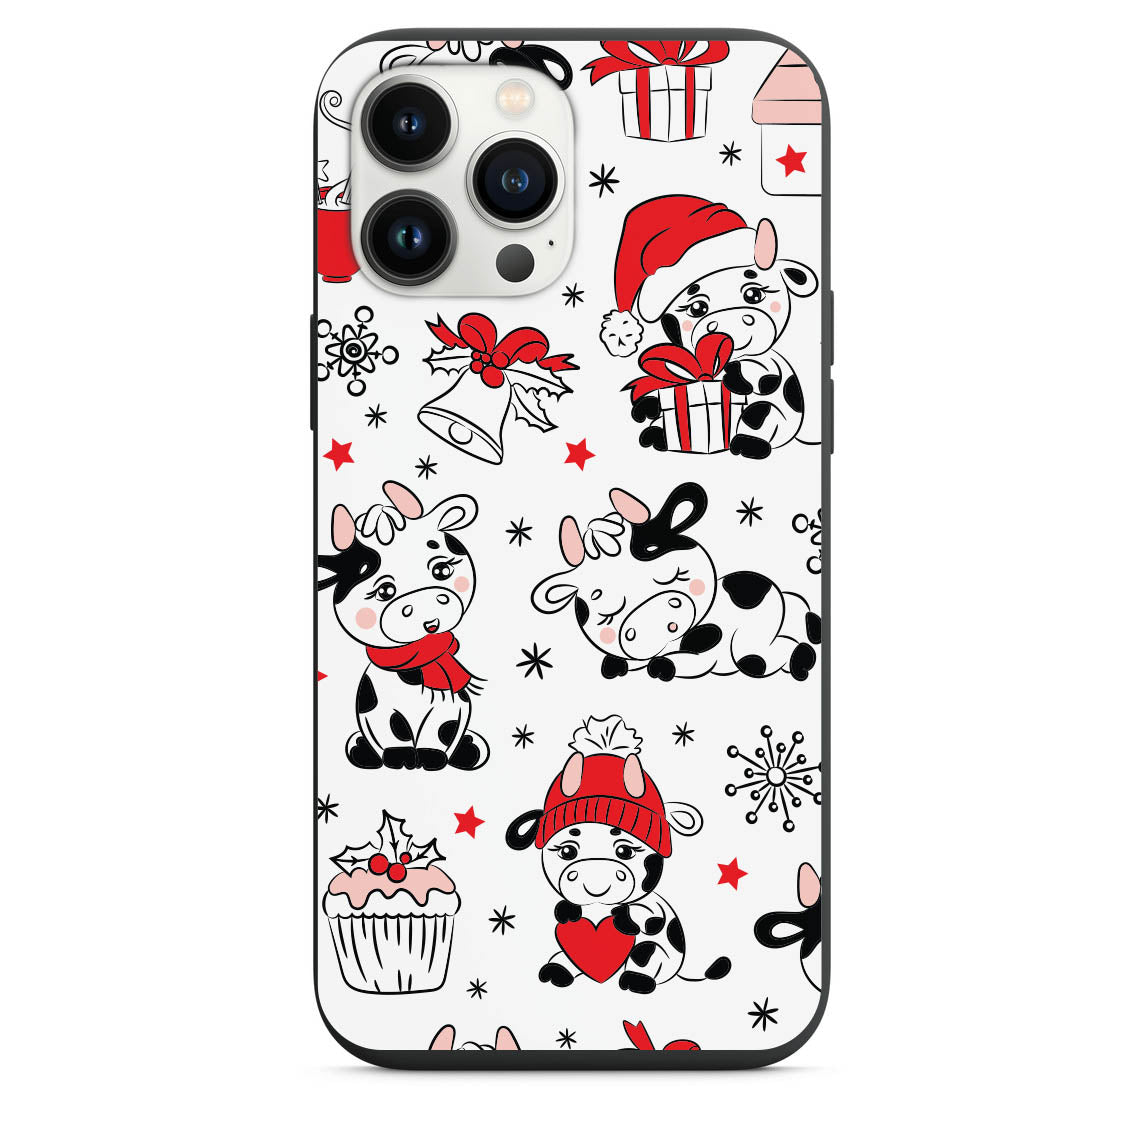 Cutest Christmas Cows And Cupcakes Phone Case for iPhone 7 8 X XS XR SE 11 12 13 14 Pro Max Mini Note 10 20 s10 s10s s20 s21 20 Plus Ultra